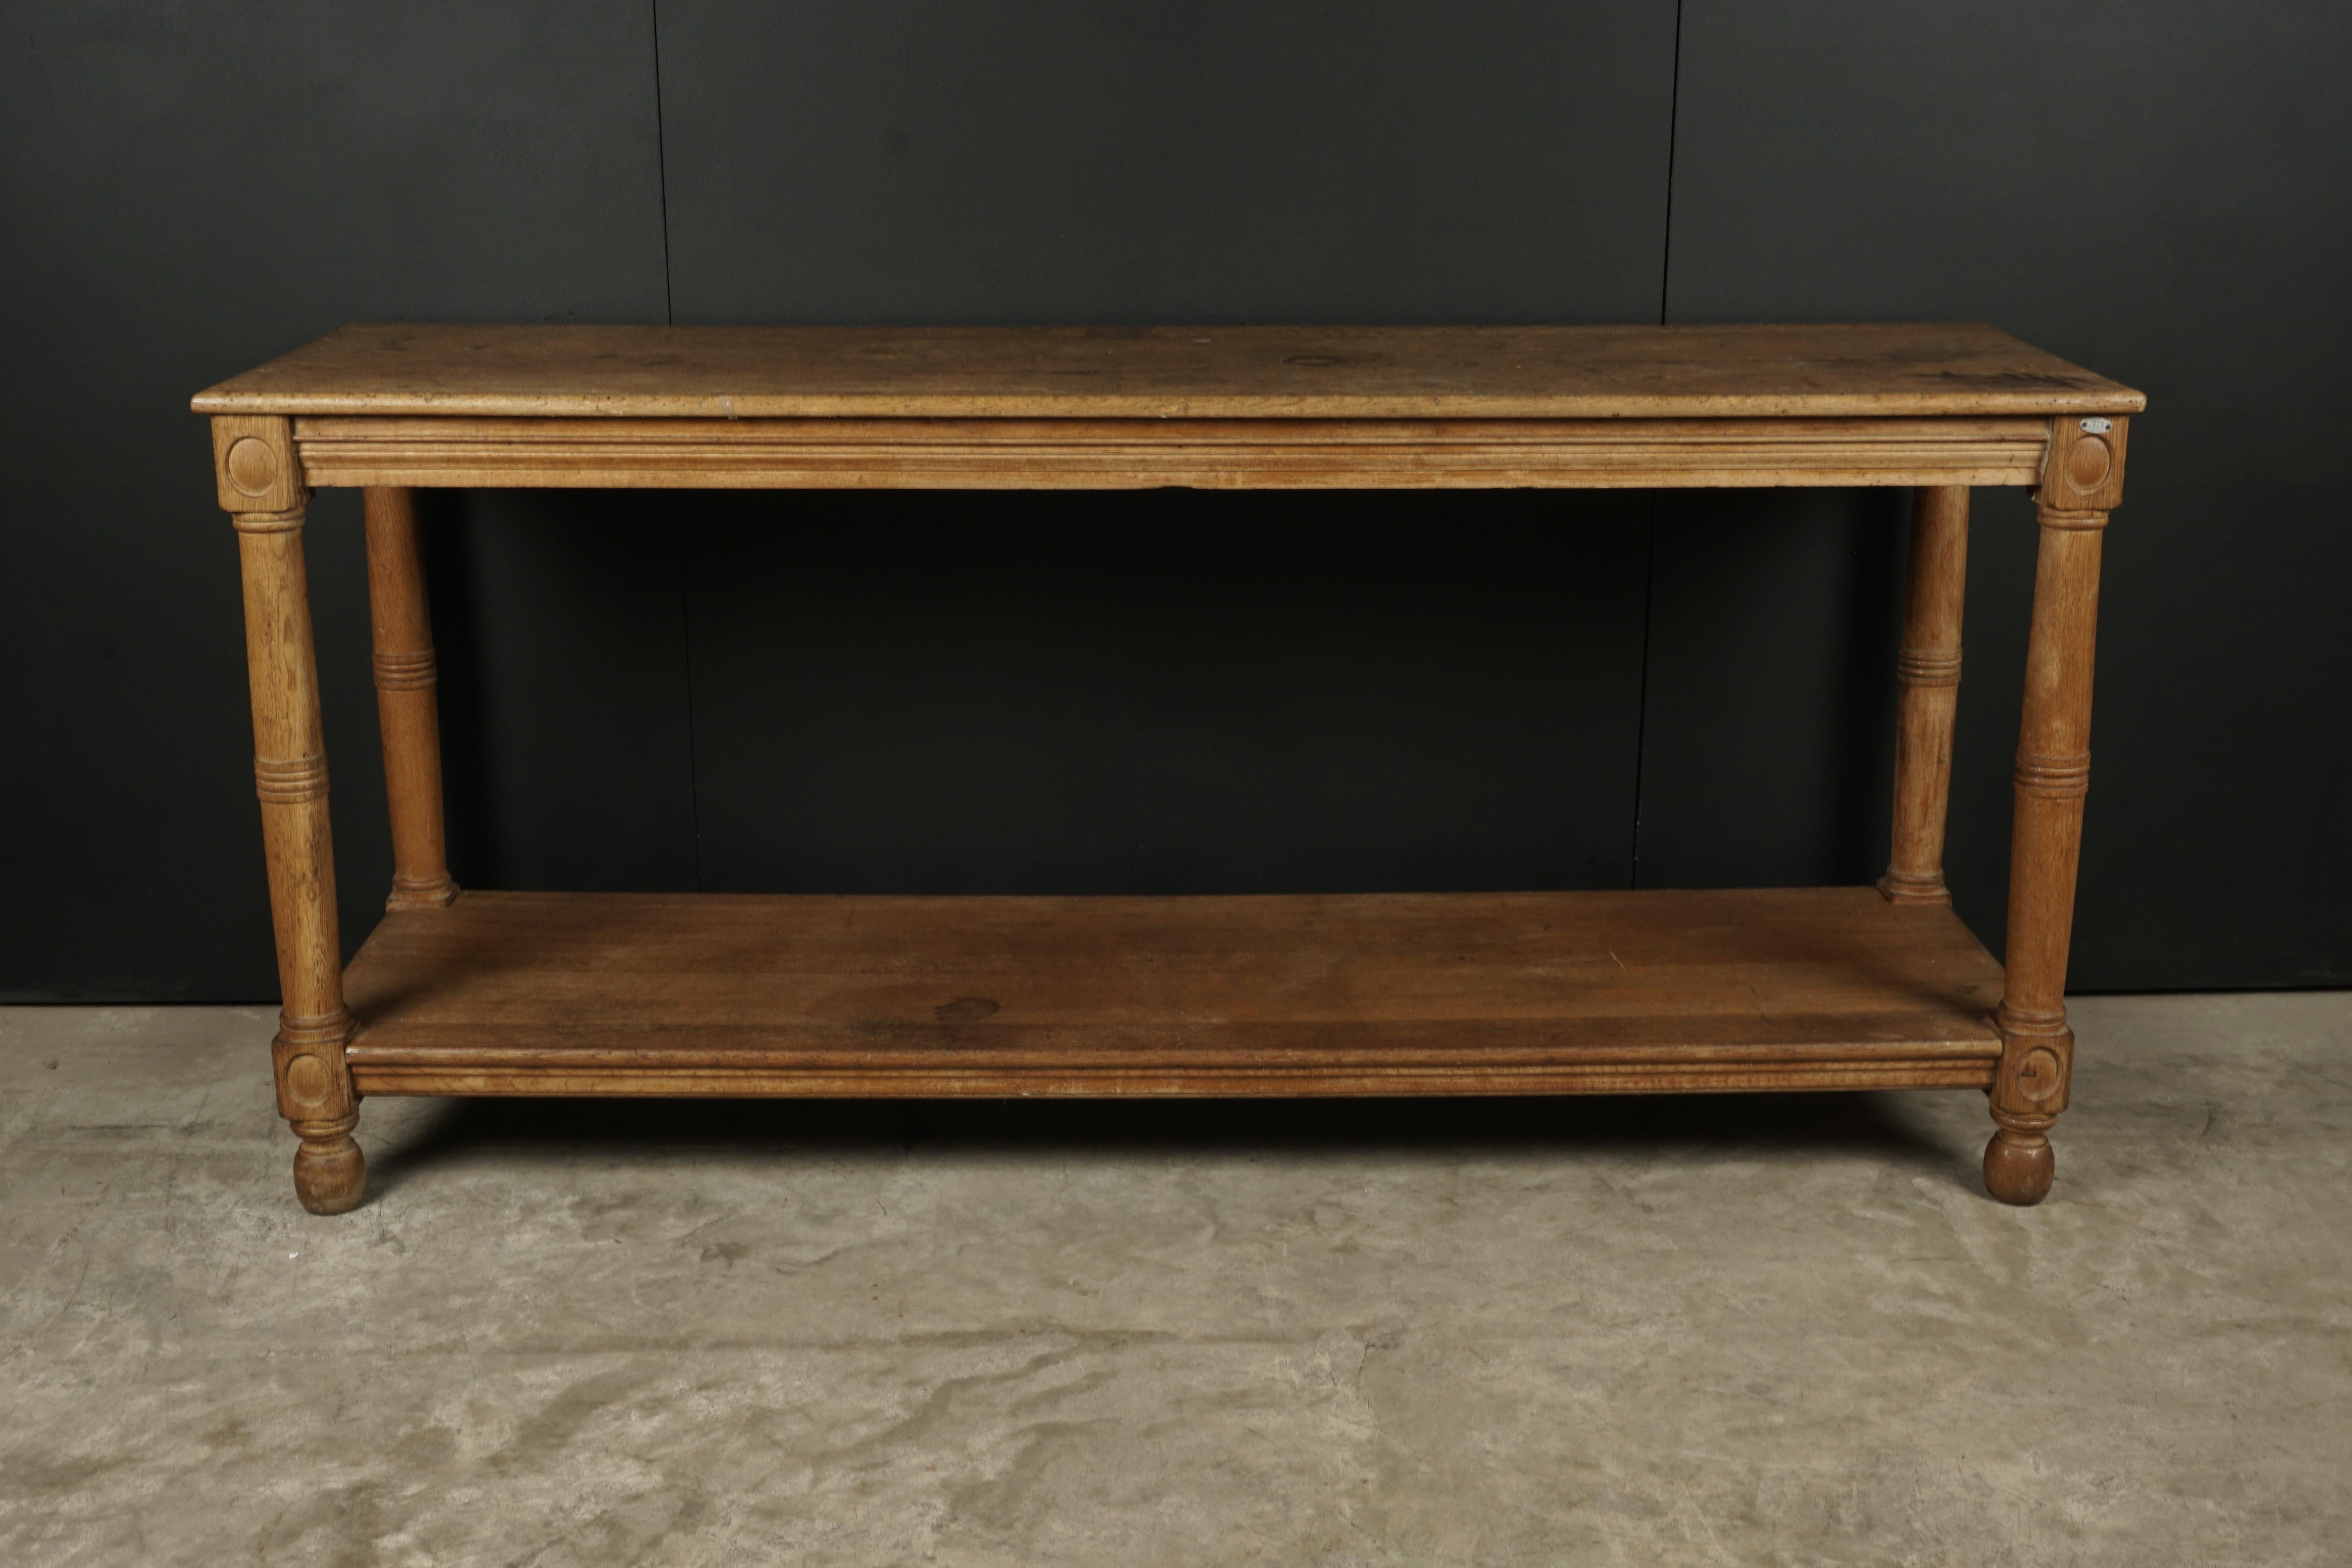 Early oak console table from France, circa 1930. Solid oak construction with very nice wear and patina.